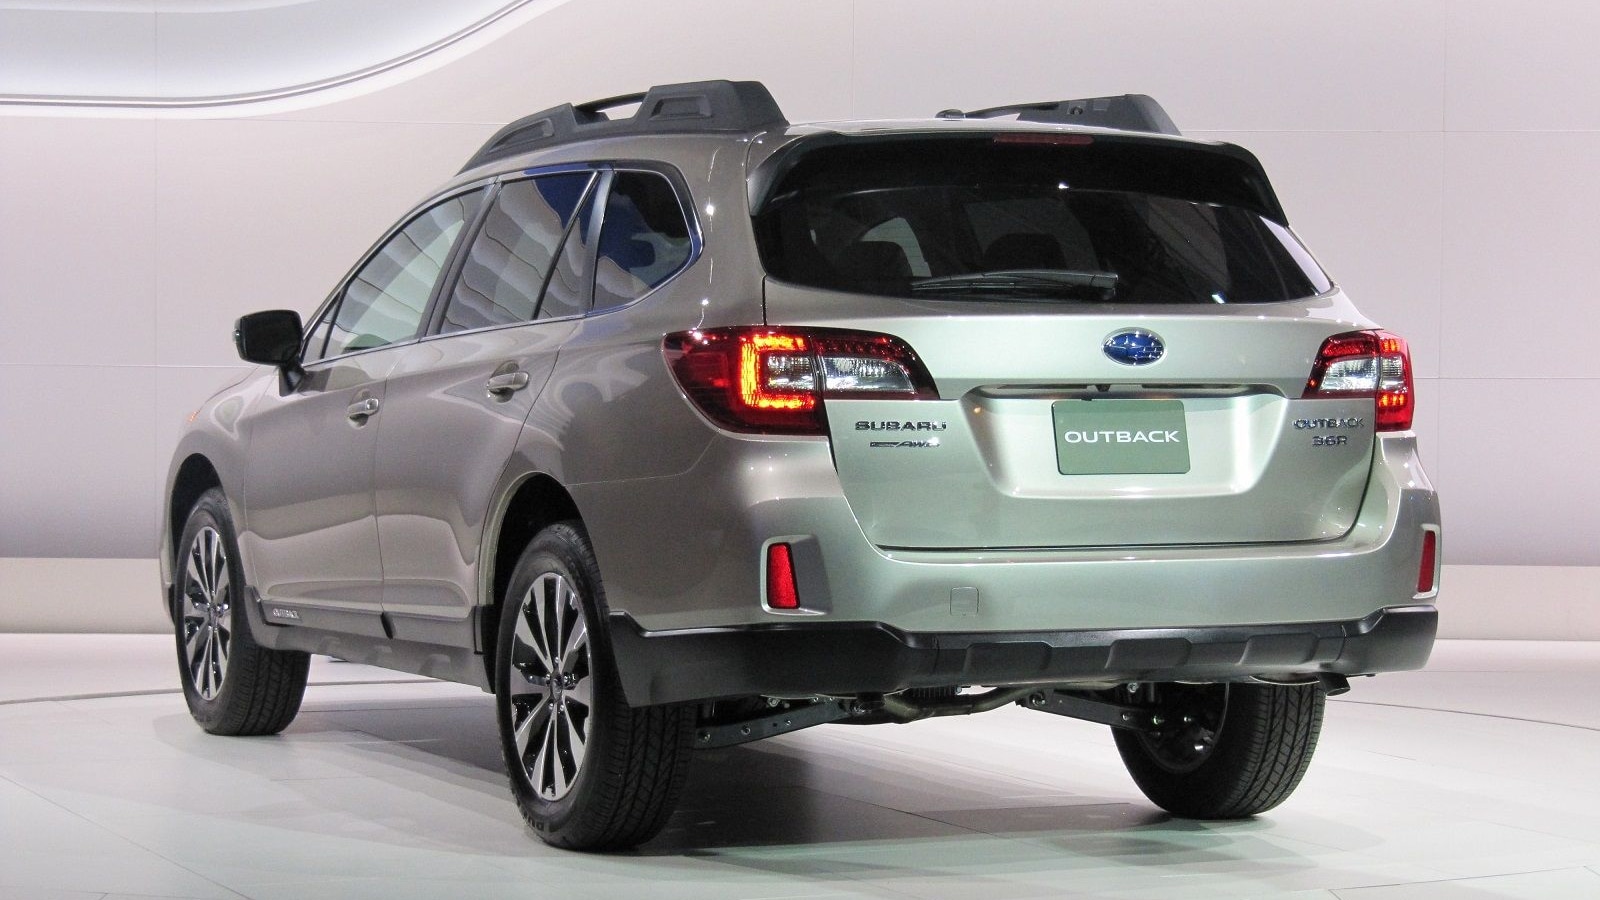 2015 Subaru Outback introduction at 2014 New York Auto Show